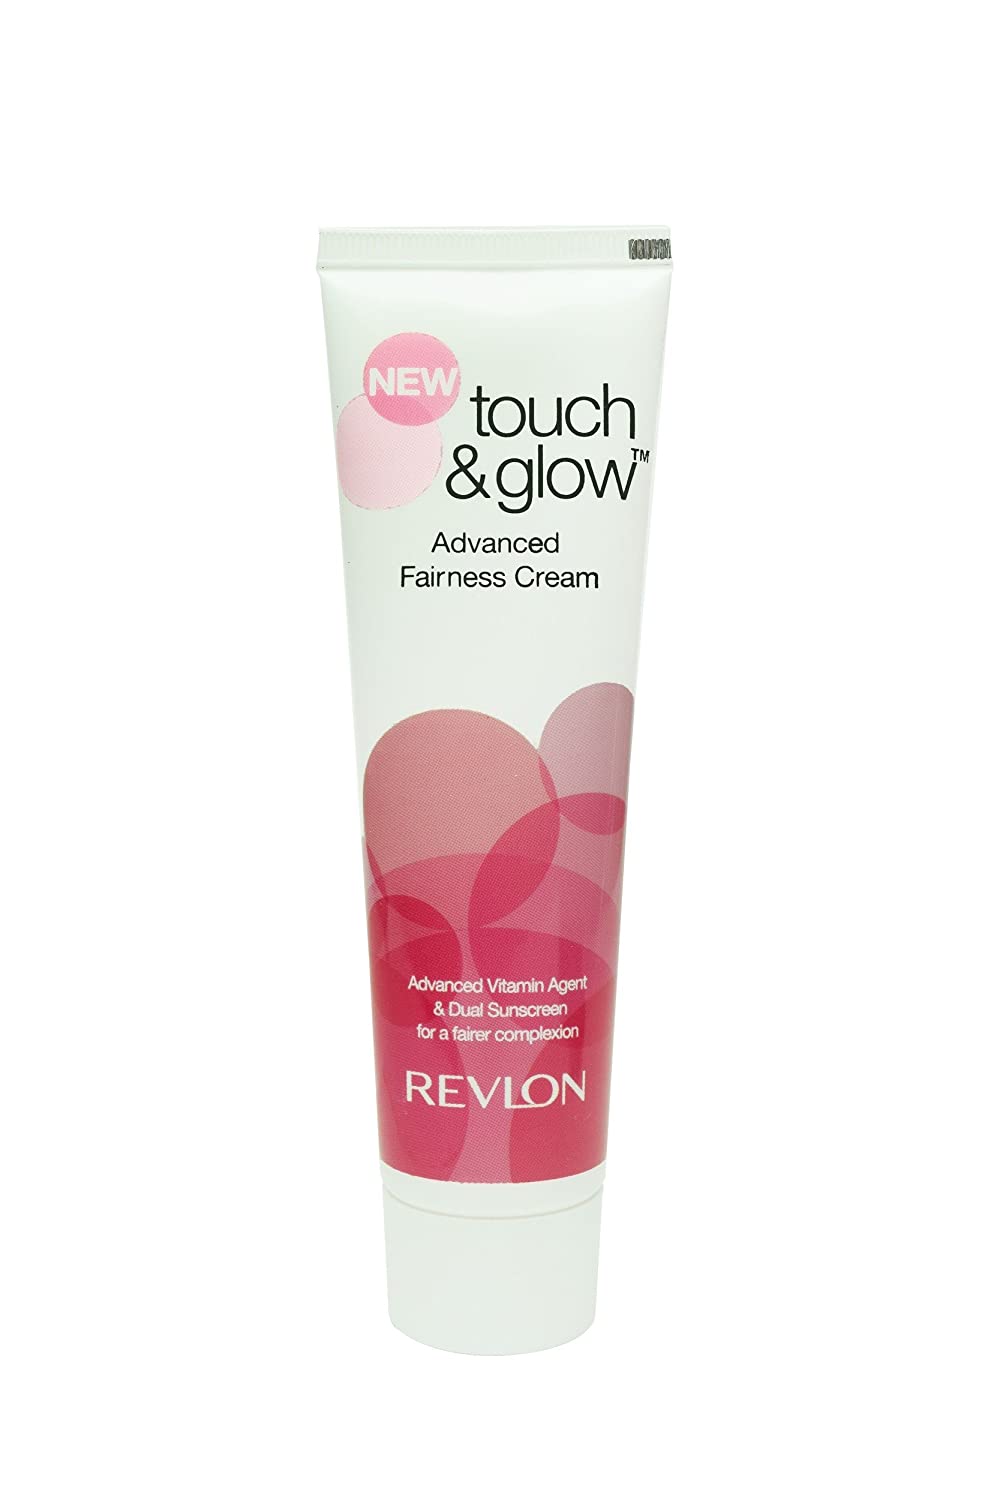 Revlon Touch and Glow Advanced Fairness Fairness Cream Brands in The World